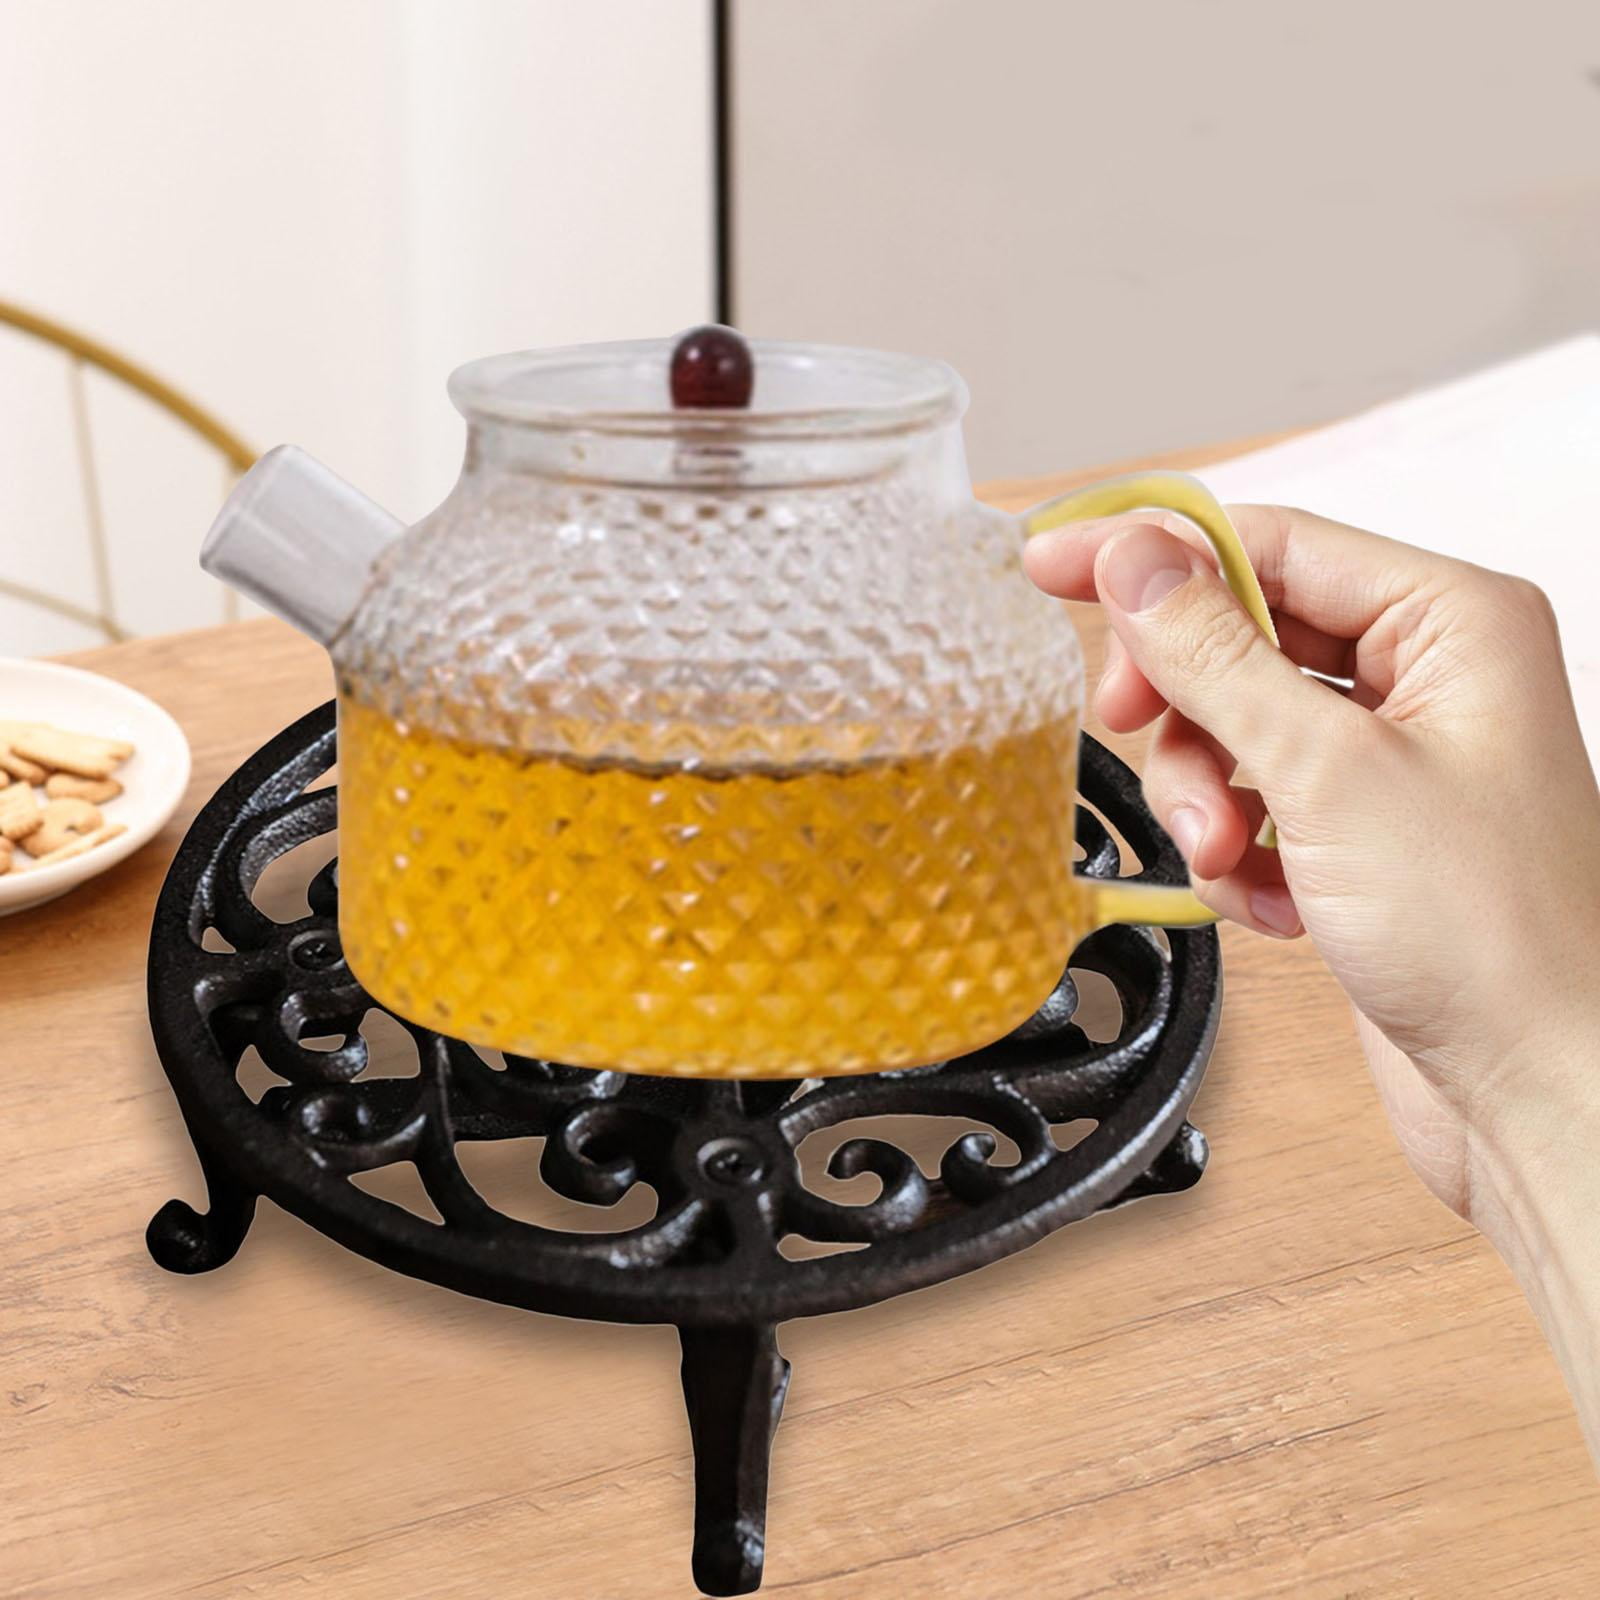 KAYBTNT Ceramic Tea Warmer for Teapot, Tea Pot Warmer, Tea Light Warmer,  Round Teapot Stove Heater Base with Metal Plate and Candle Holders for  Glass